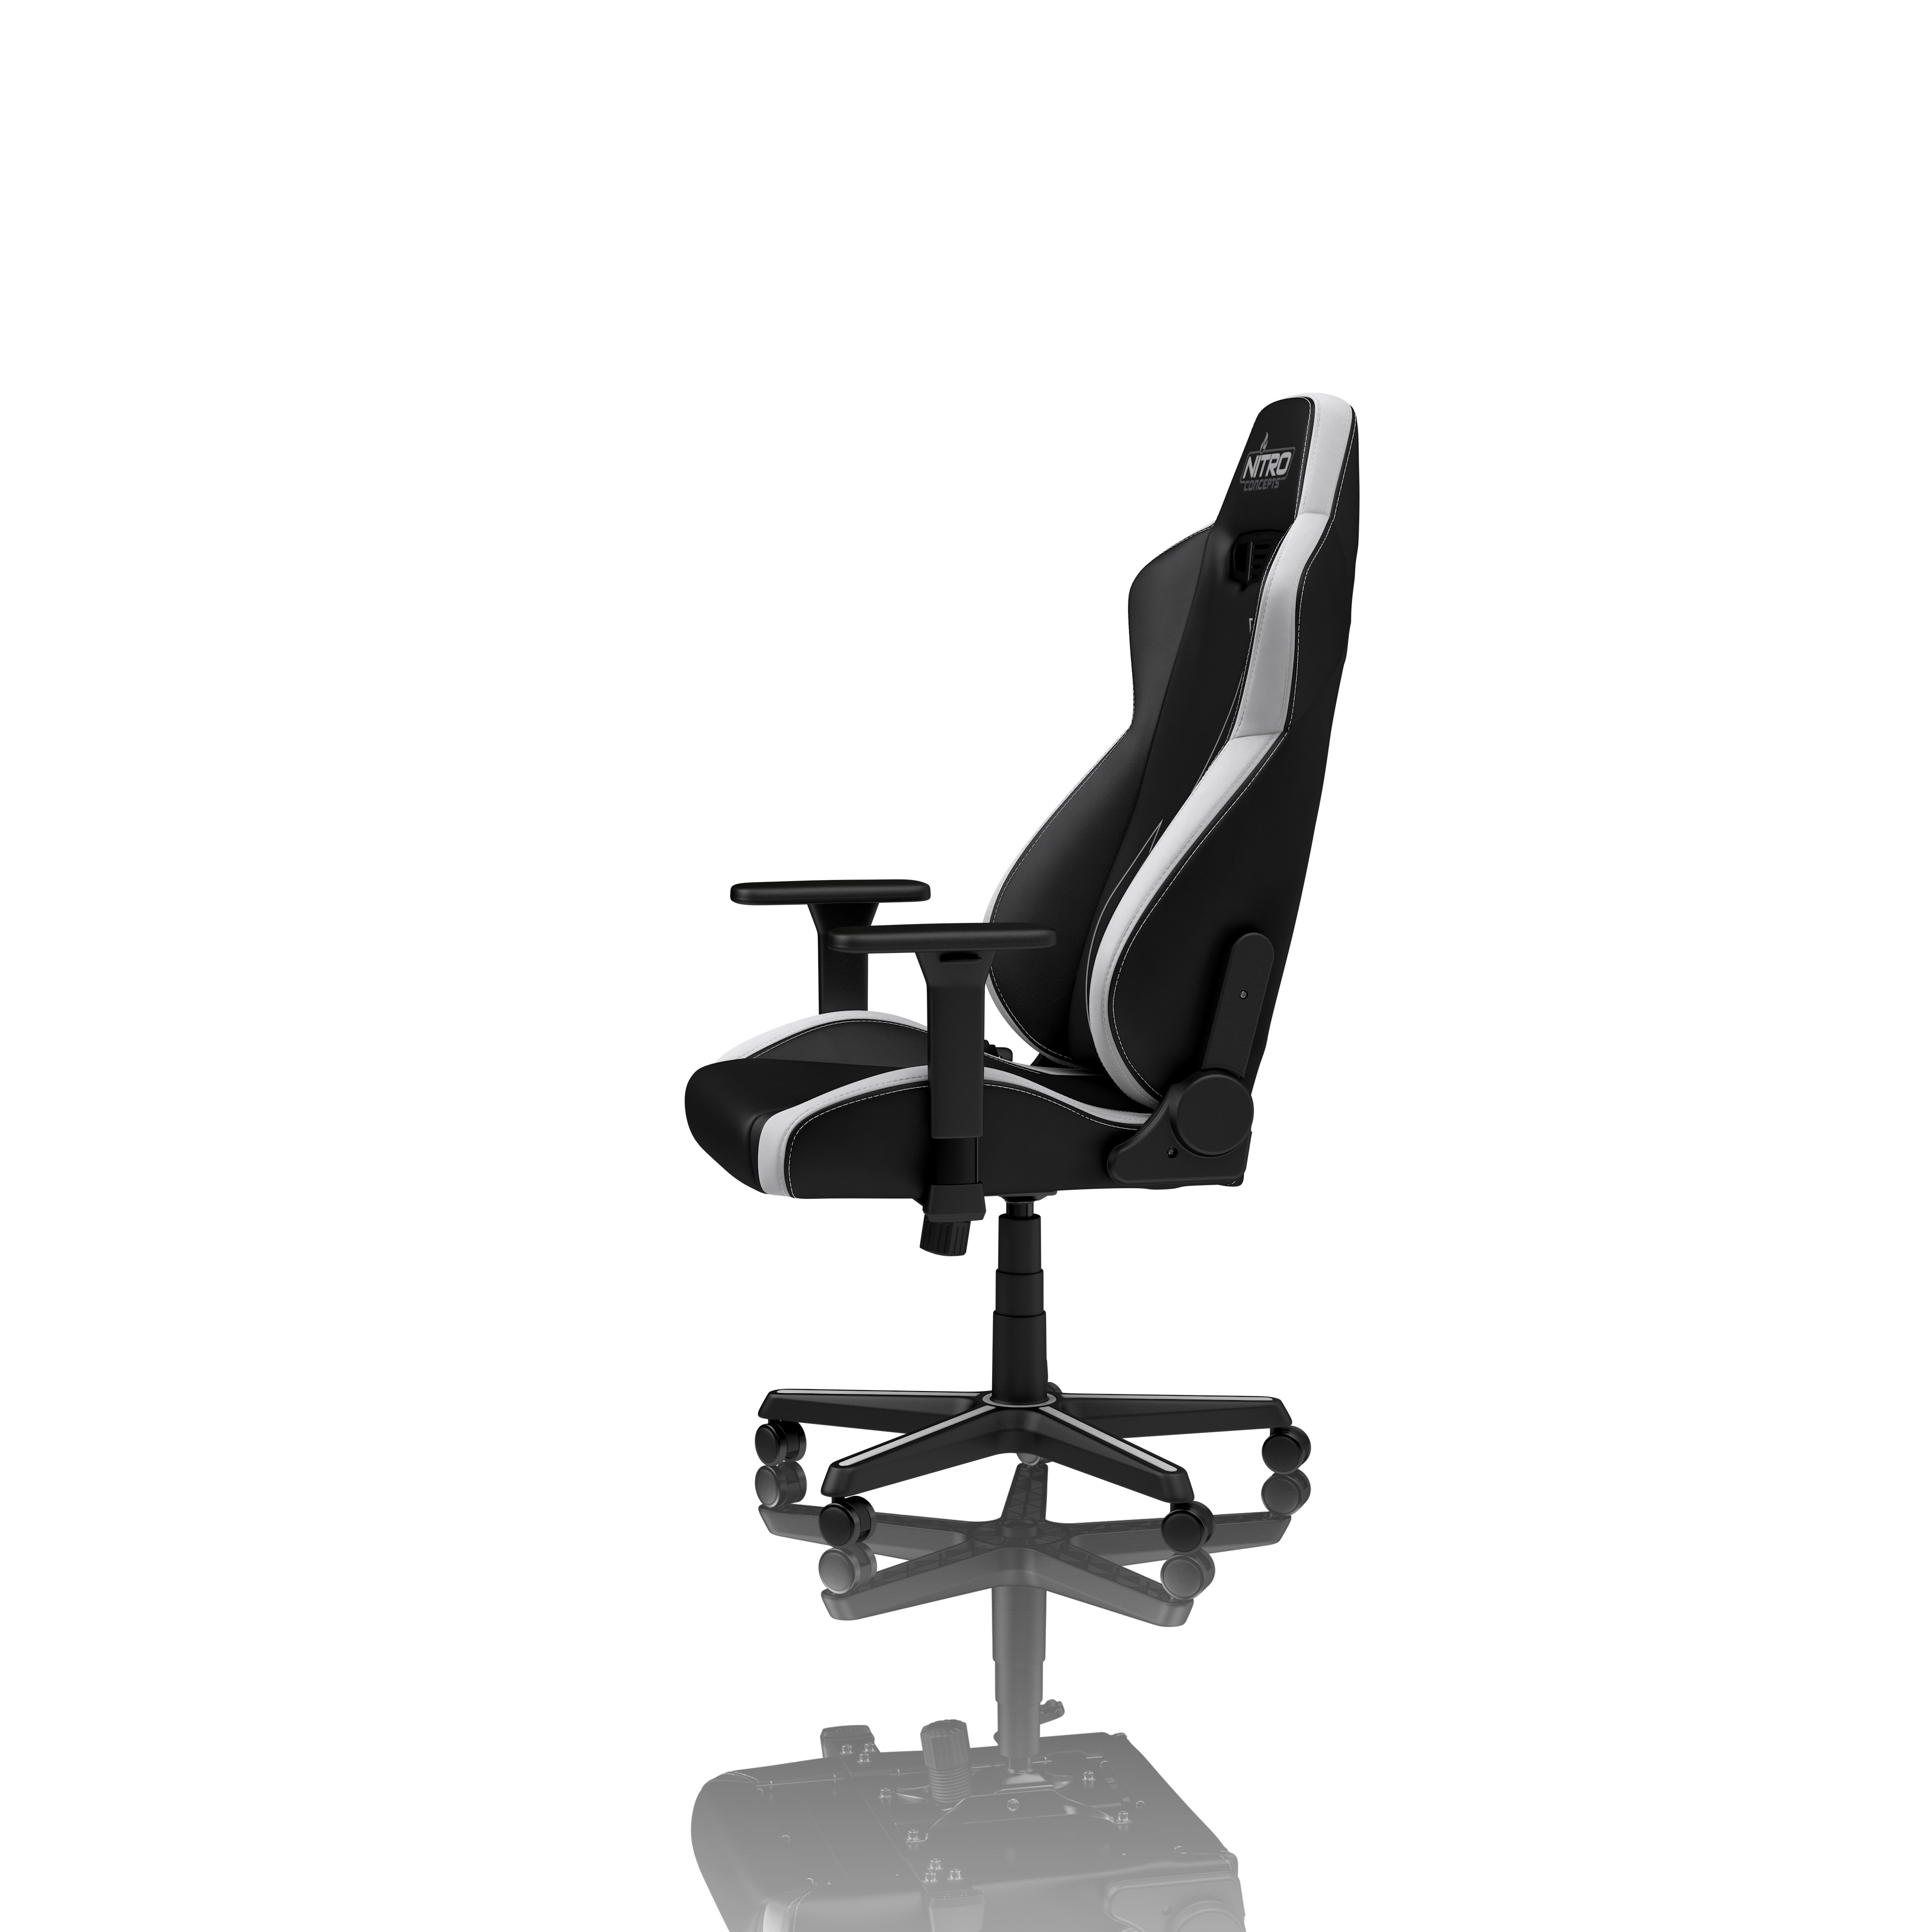 nitro-concepts - S300 EX Gaming Chair Radiant White